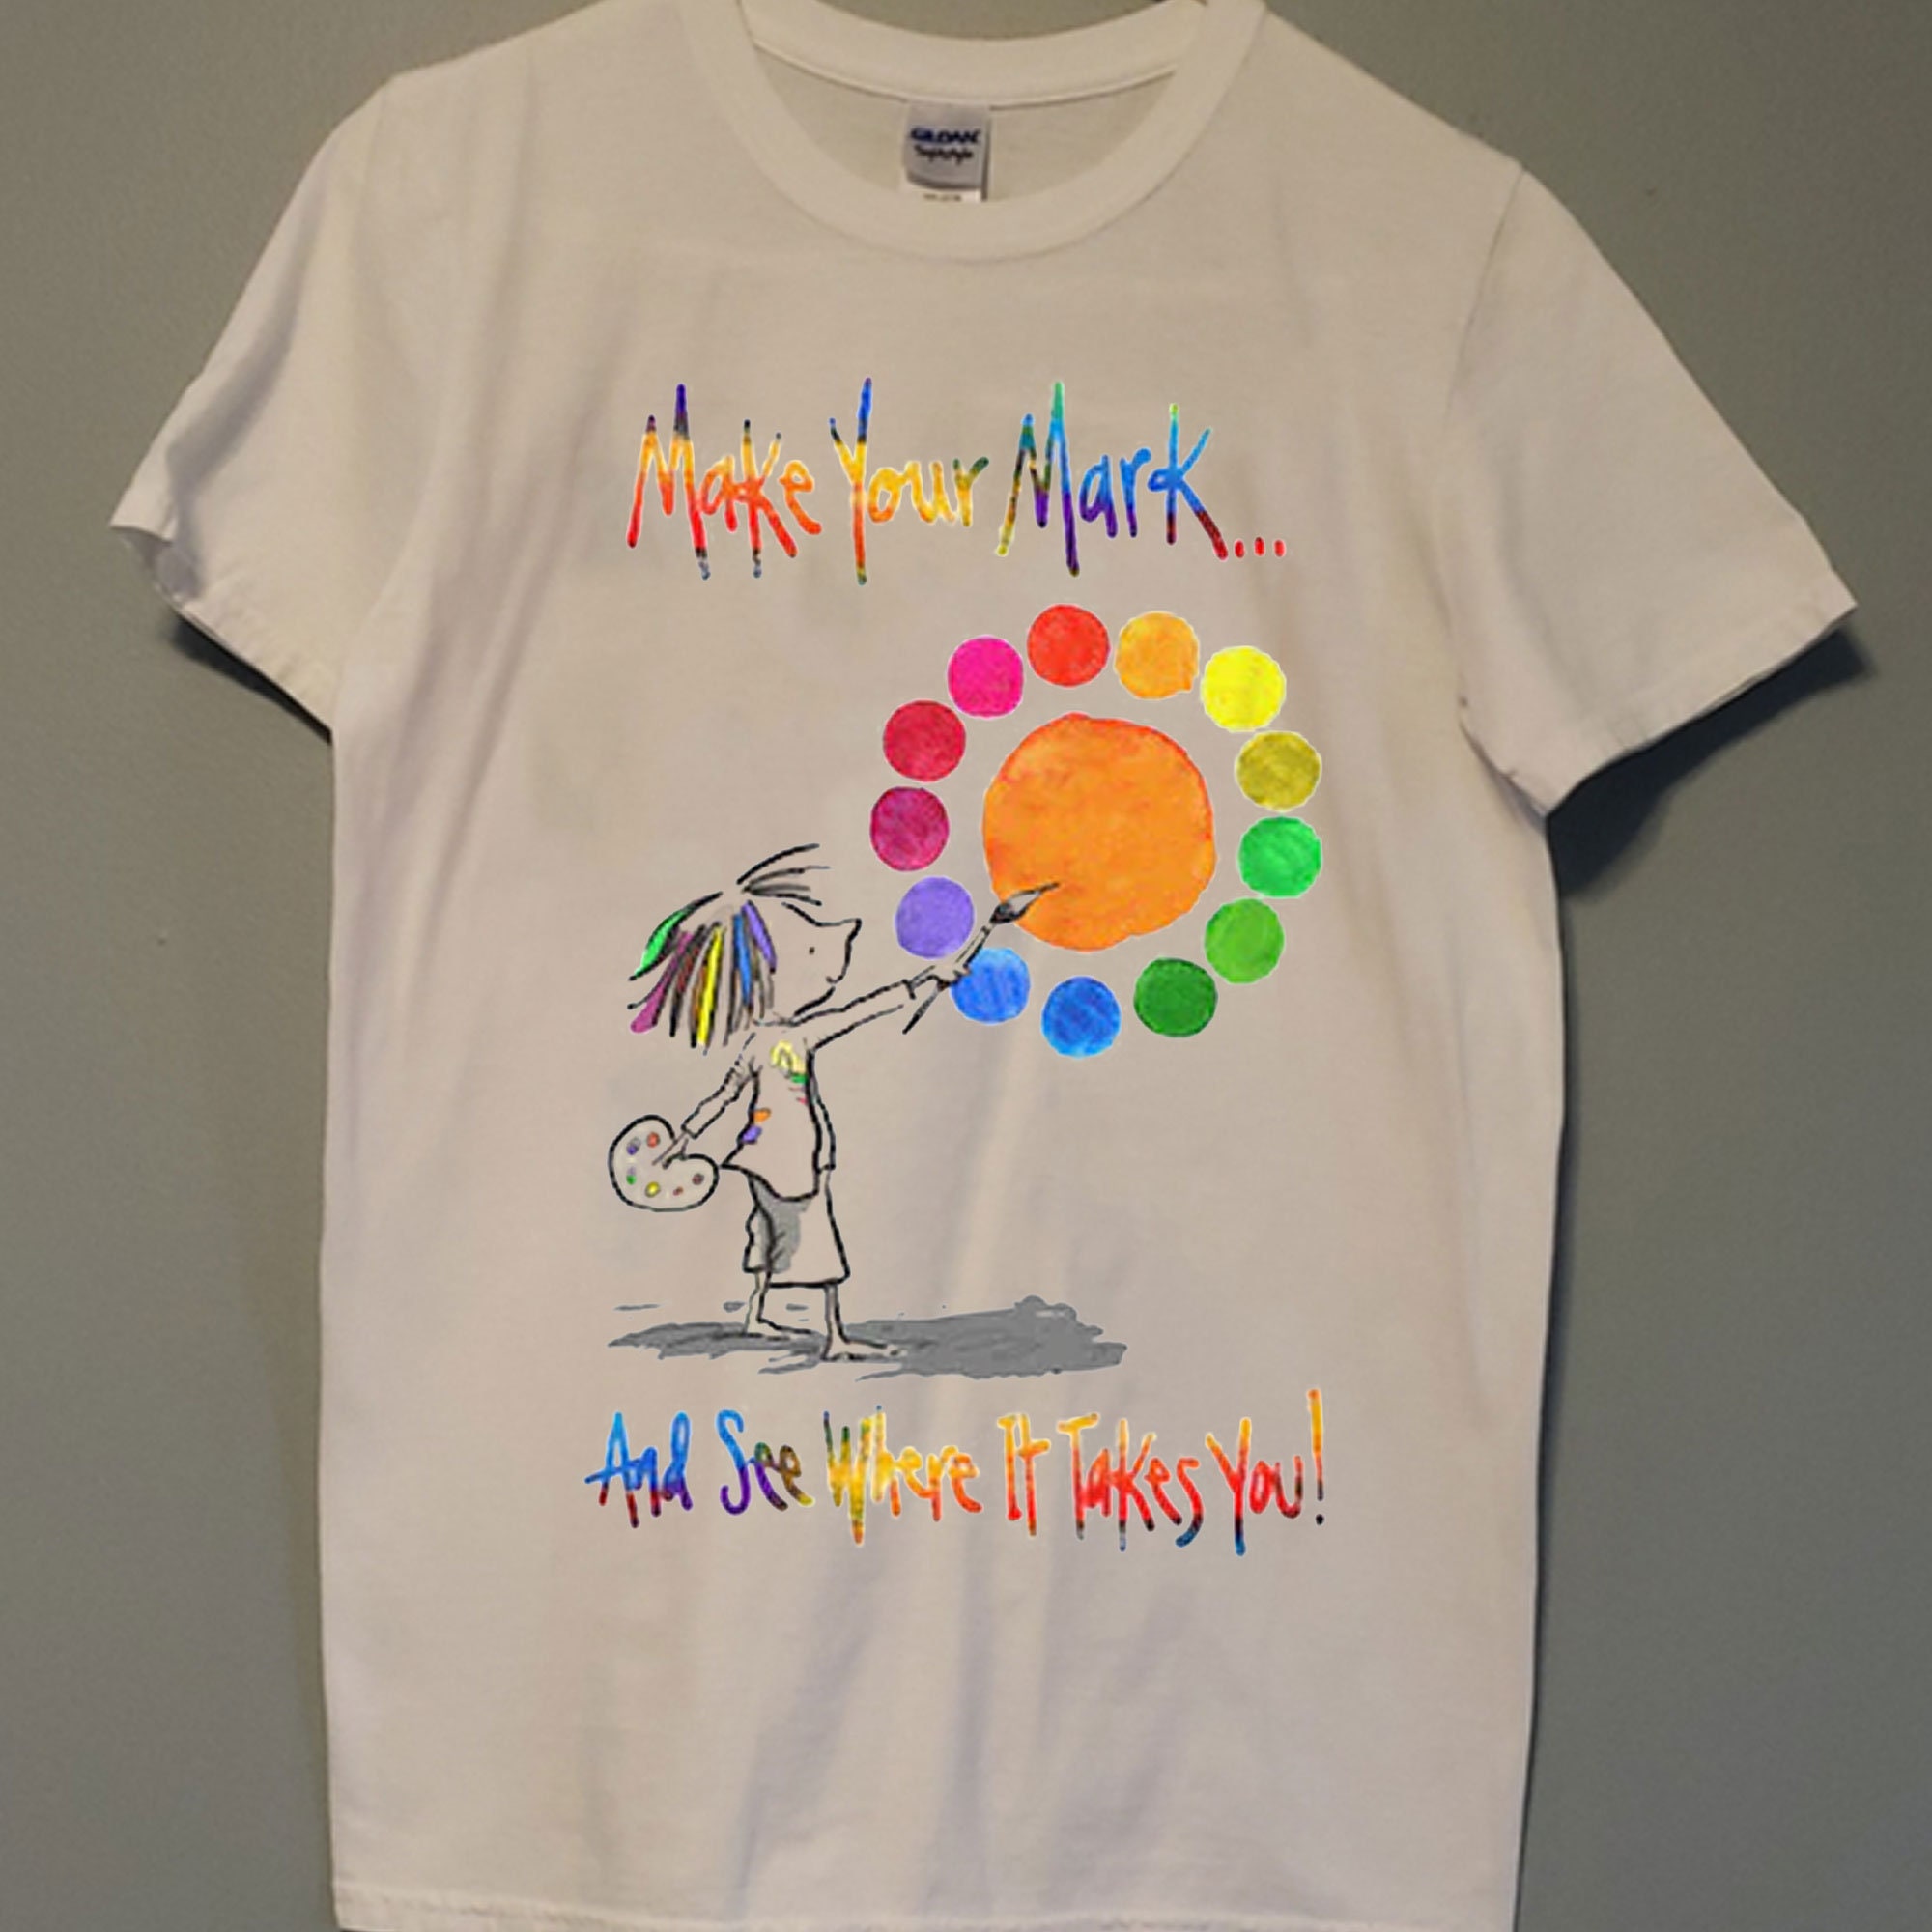 Discover International Dot Day T-Shirt, Make Your Mark and See Where It Takes You Unisex T-Shirts